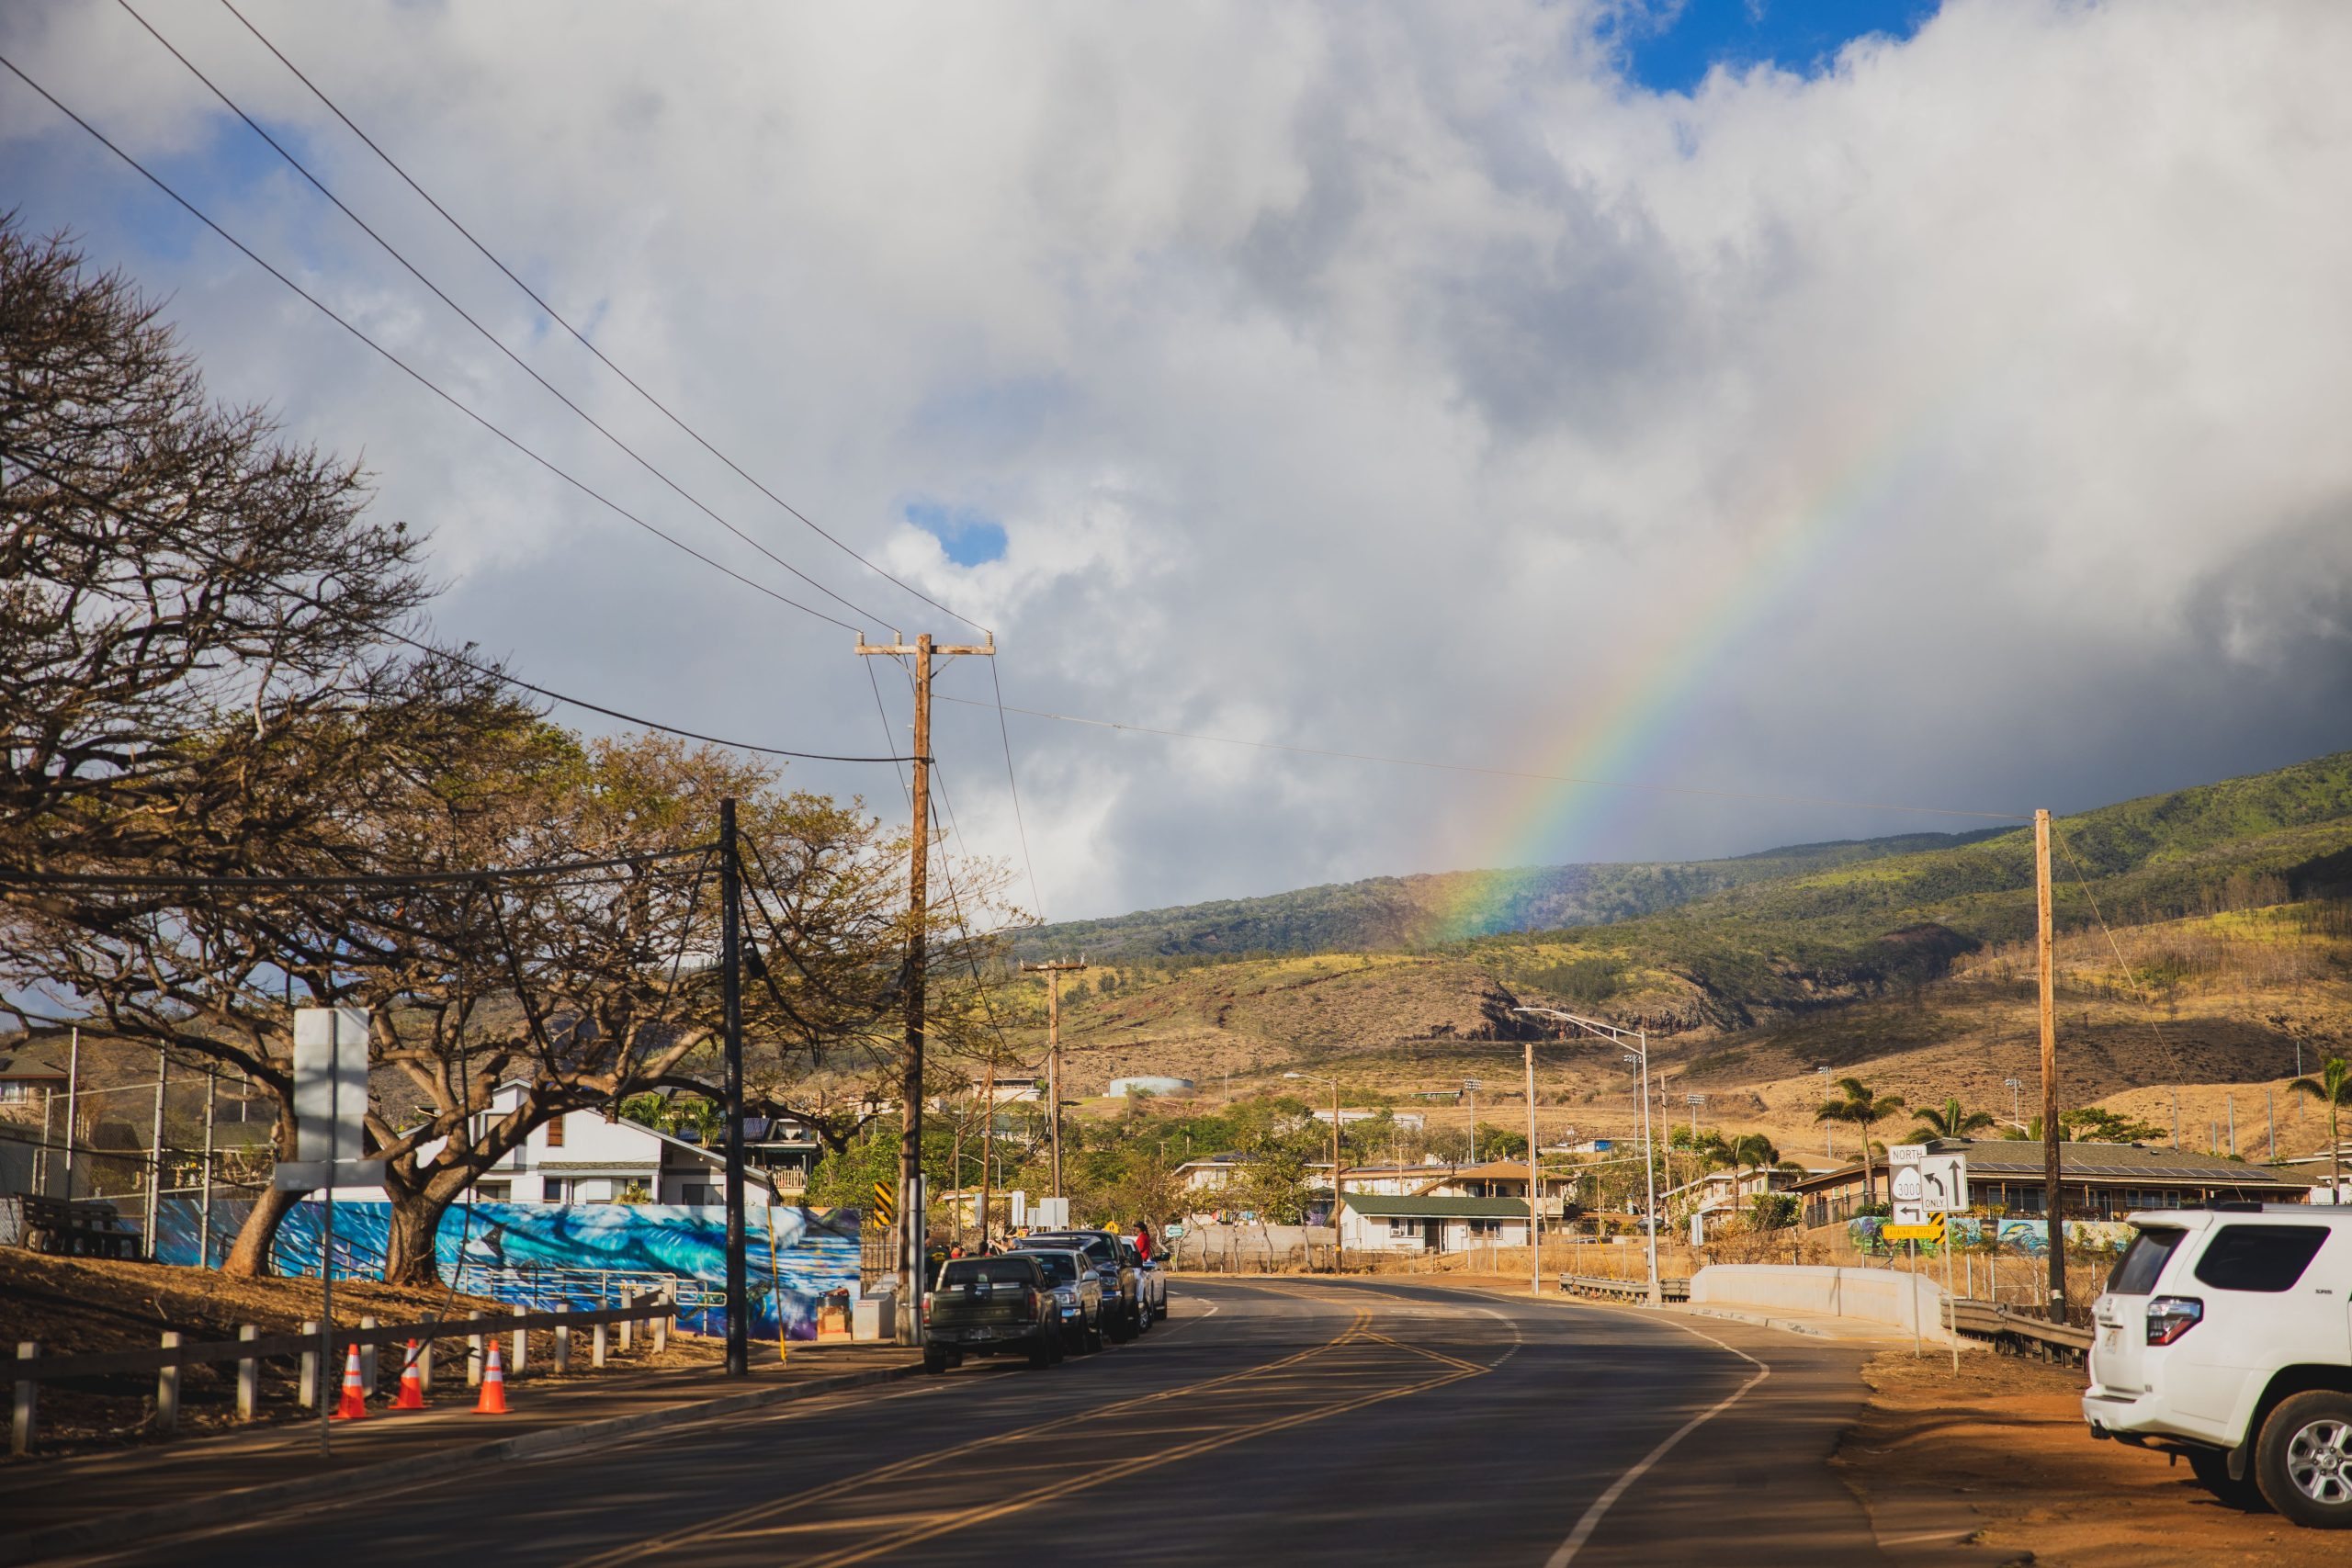 View of a town from a road with clouds and a rainbow overhead